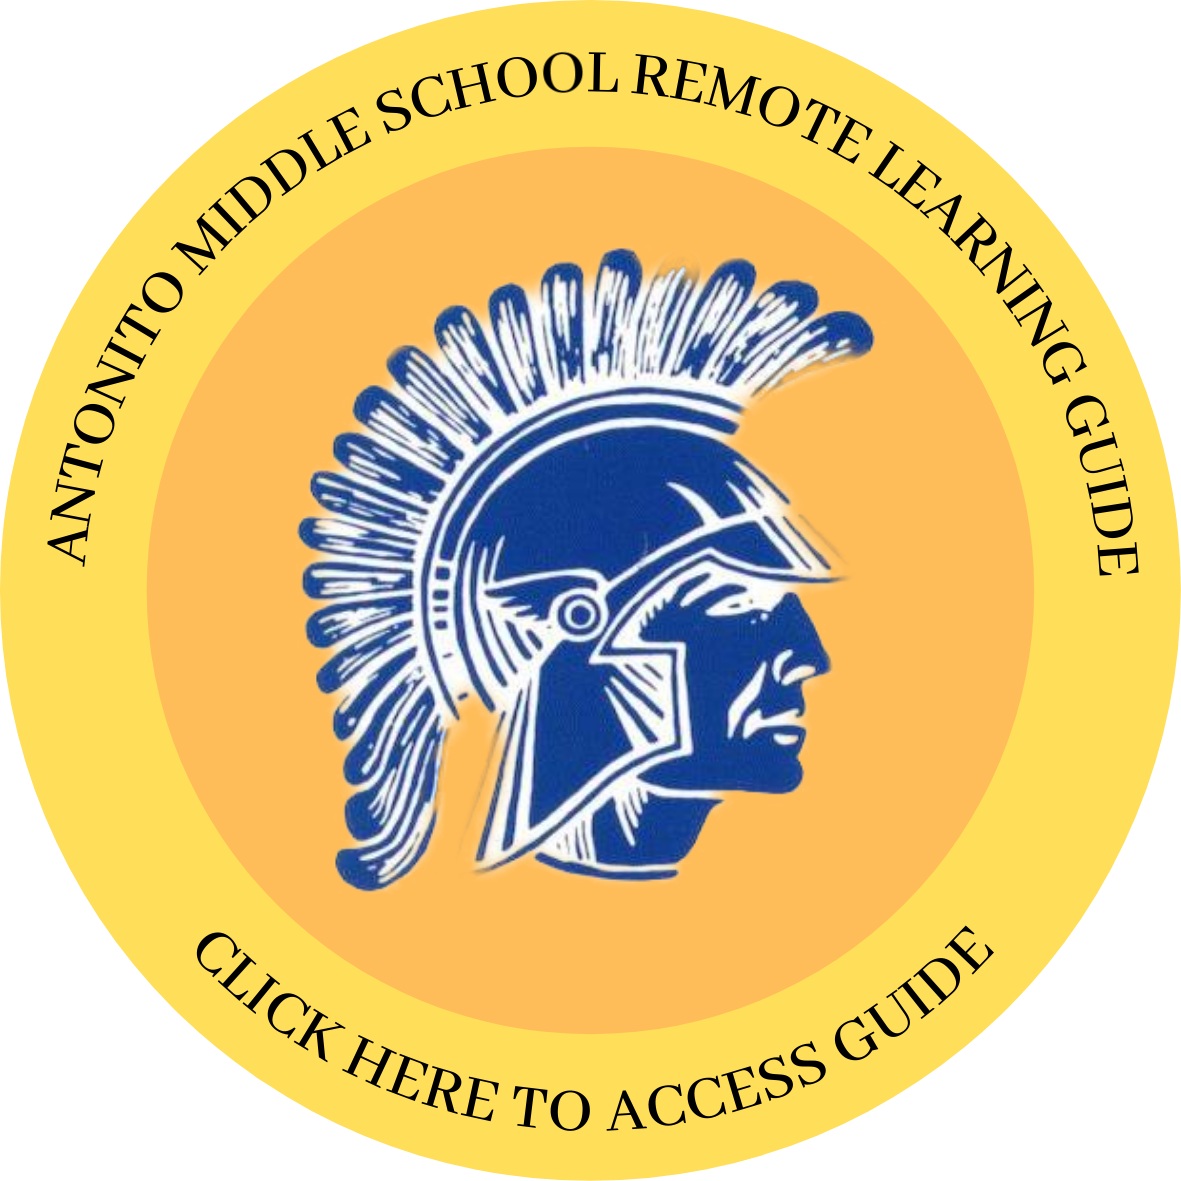 Middle School Remote Learning Guide